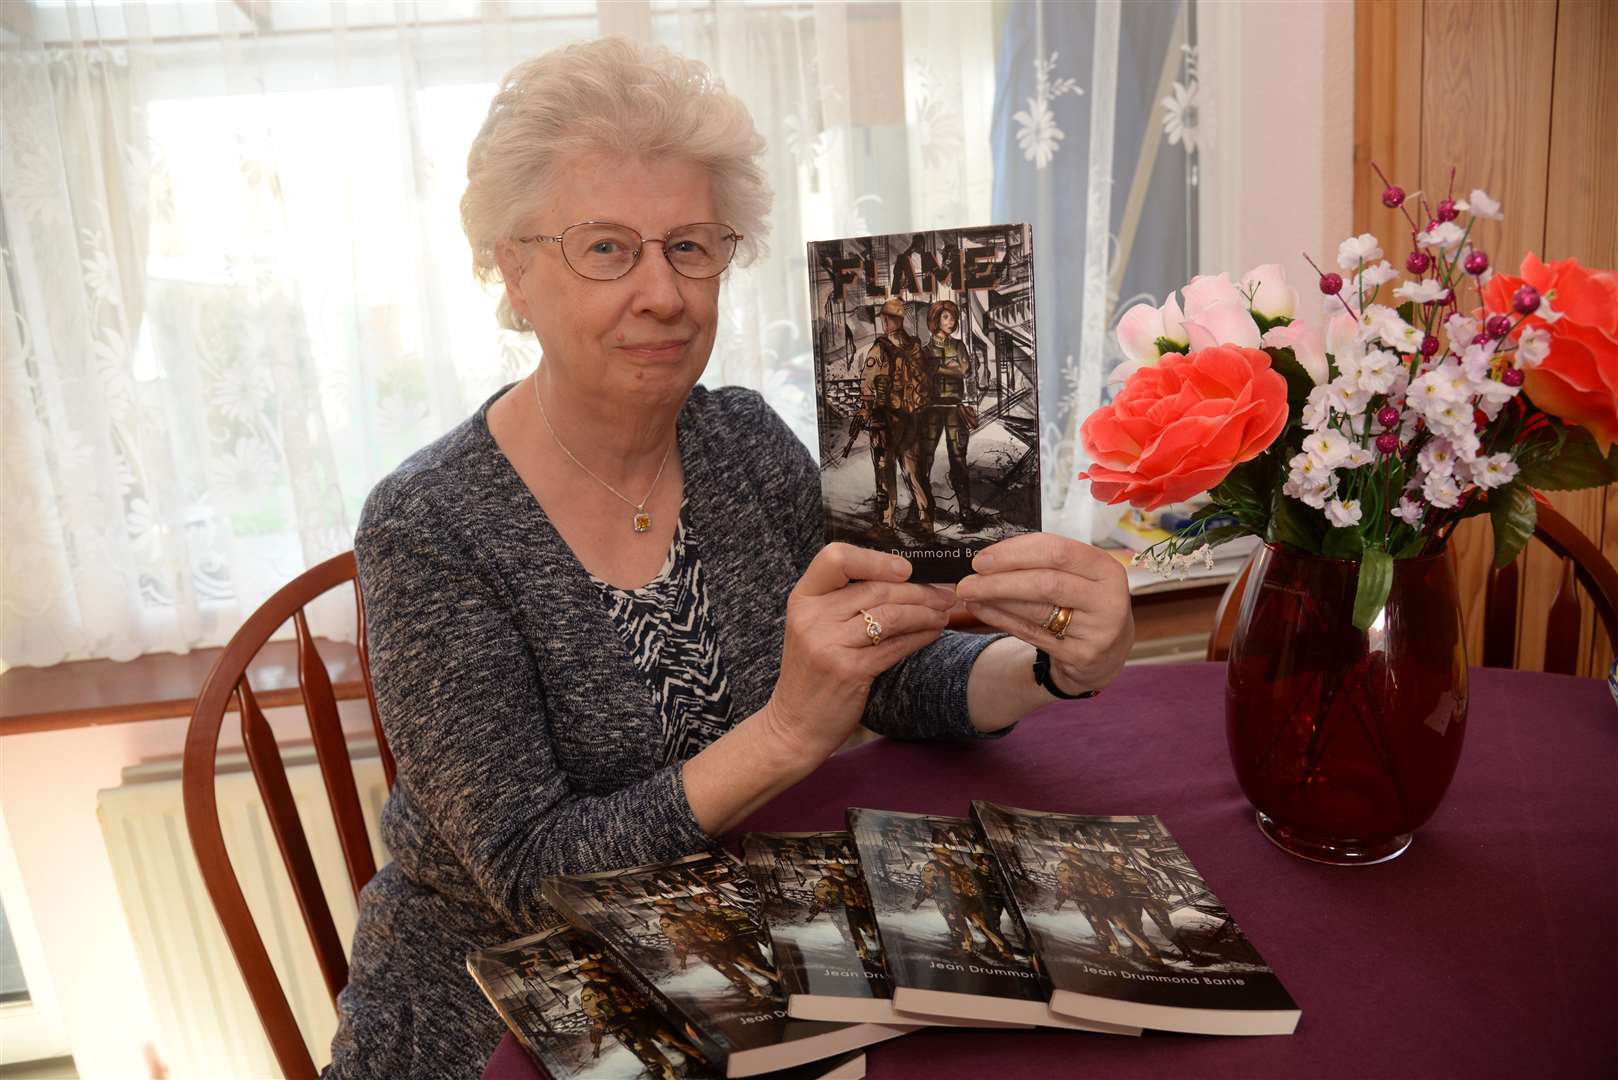 Jean with her book, picture Chris Davey